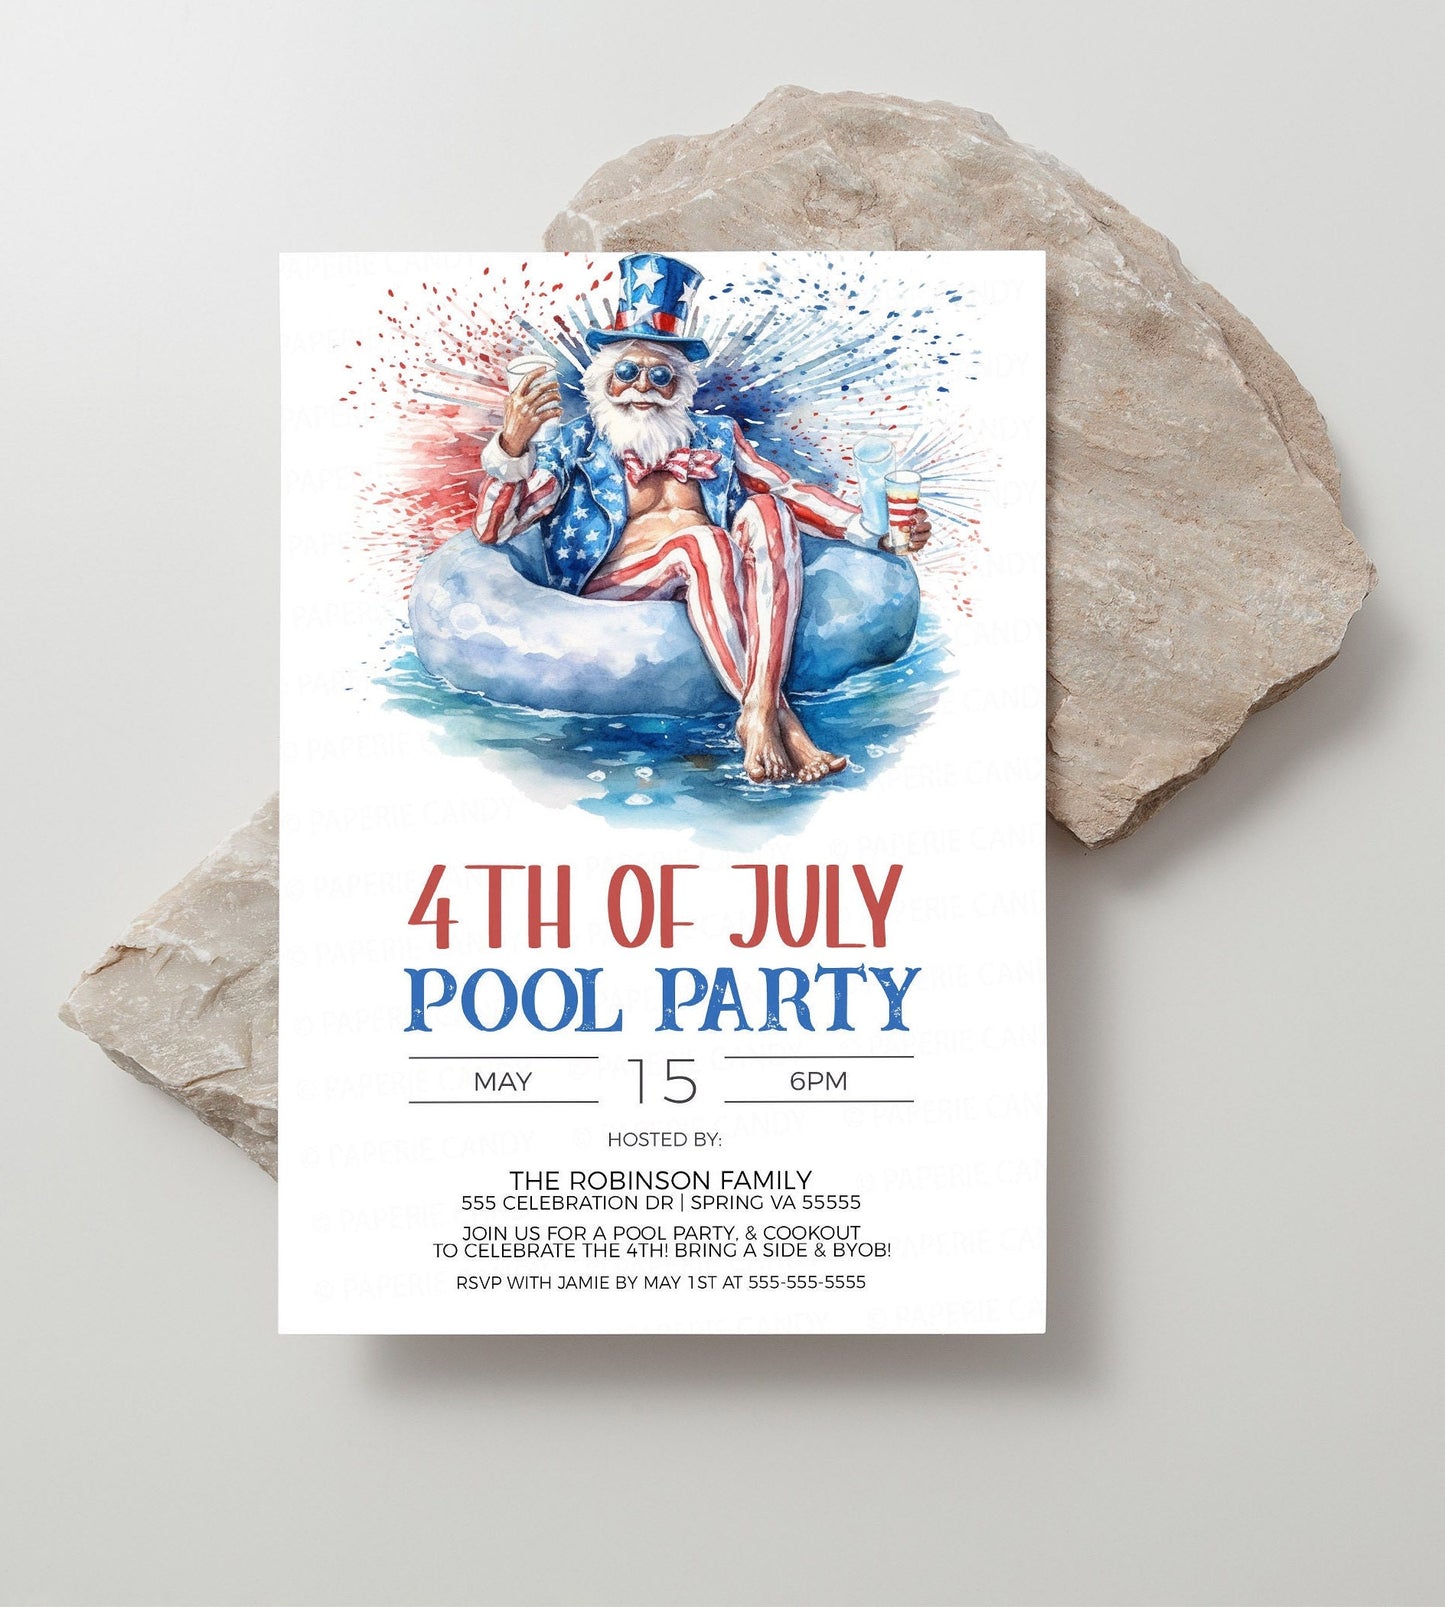 4th Of July Pool Party Invitation, Independence Day Pool Party Invite, July 4th BBQ Fireworks Pool Party, Editable Printable Template